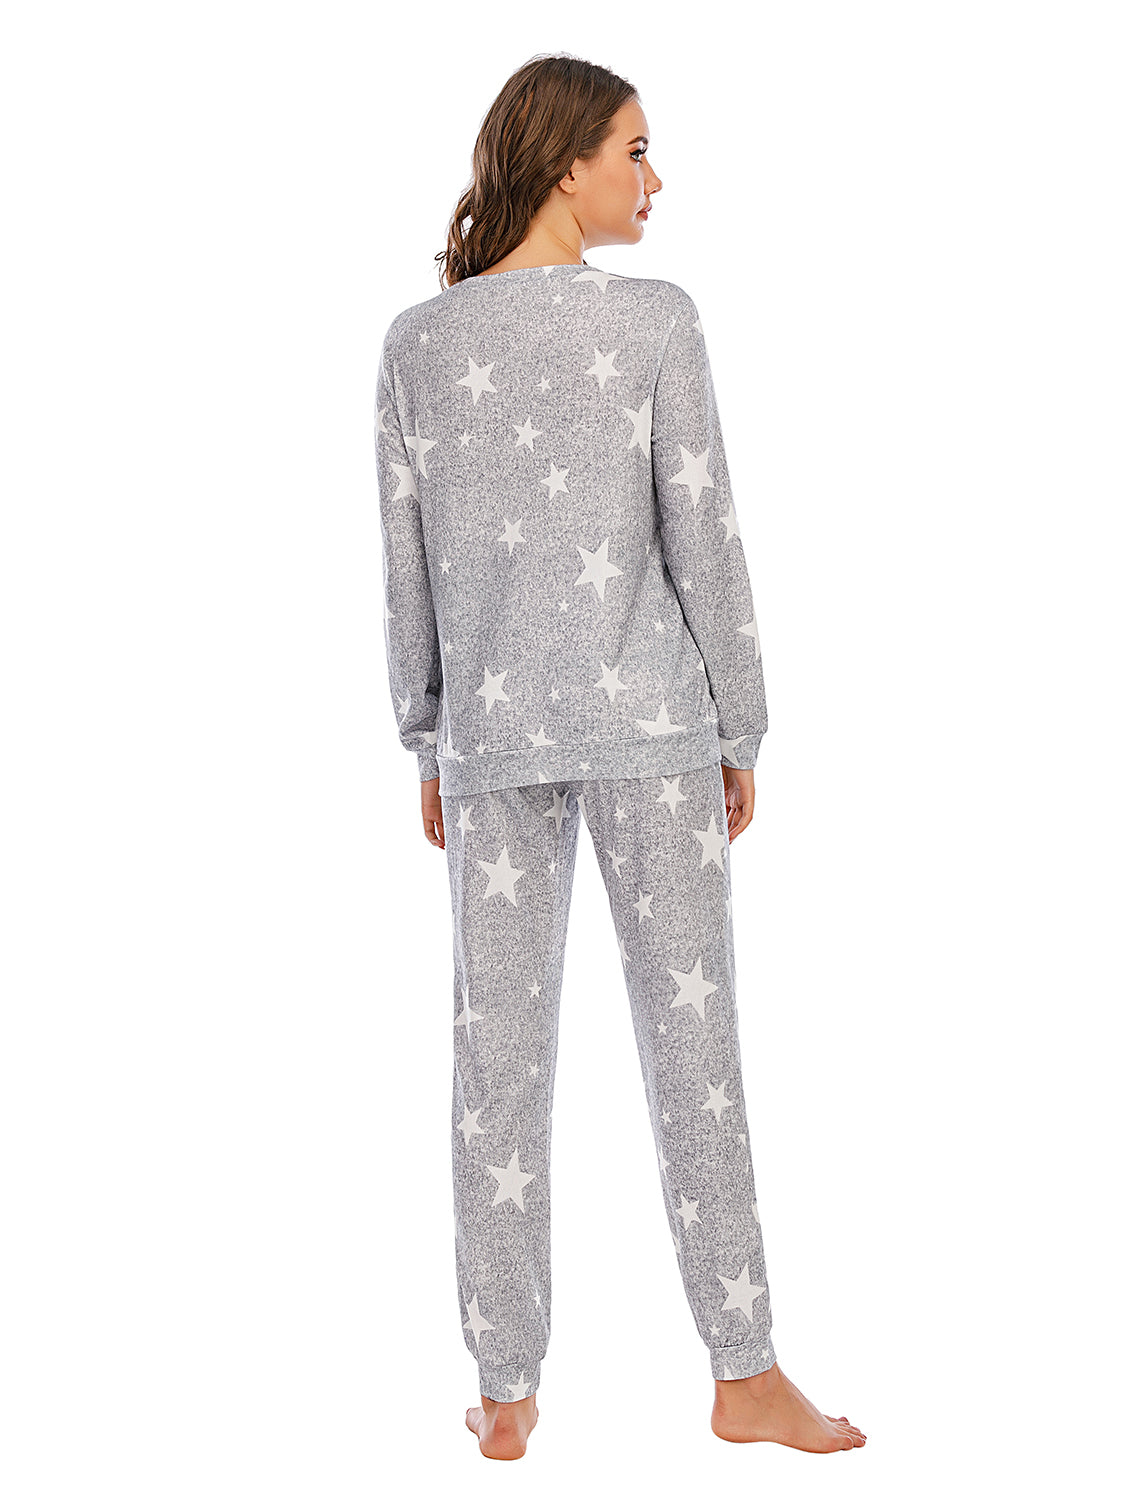 Styletrendy Star Top and Pants Lounge Set